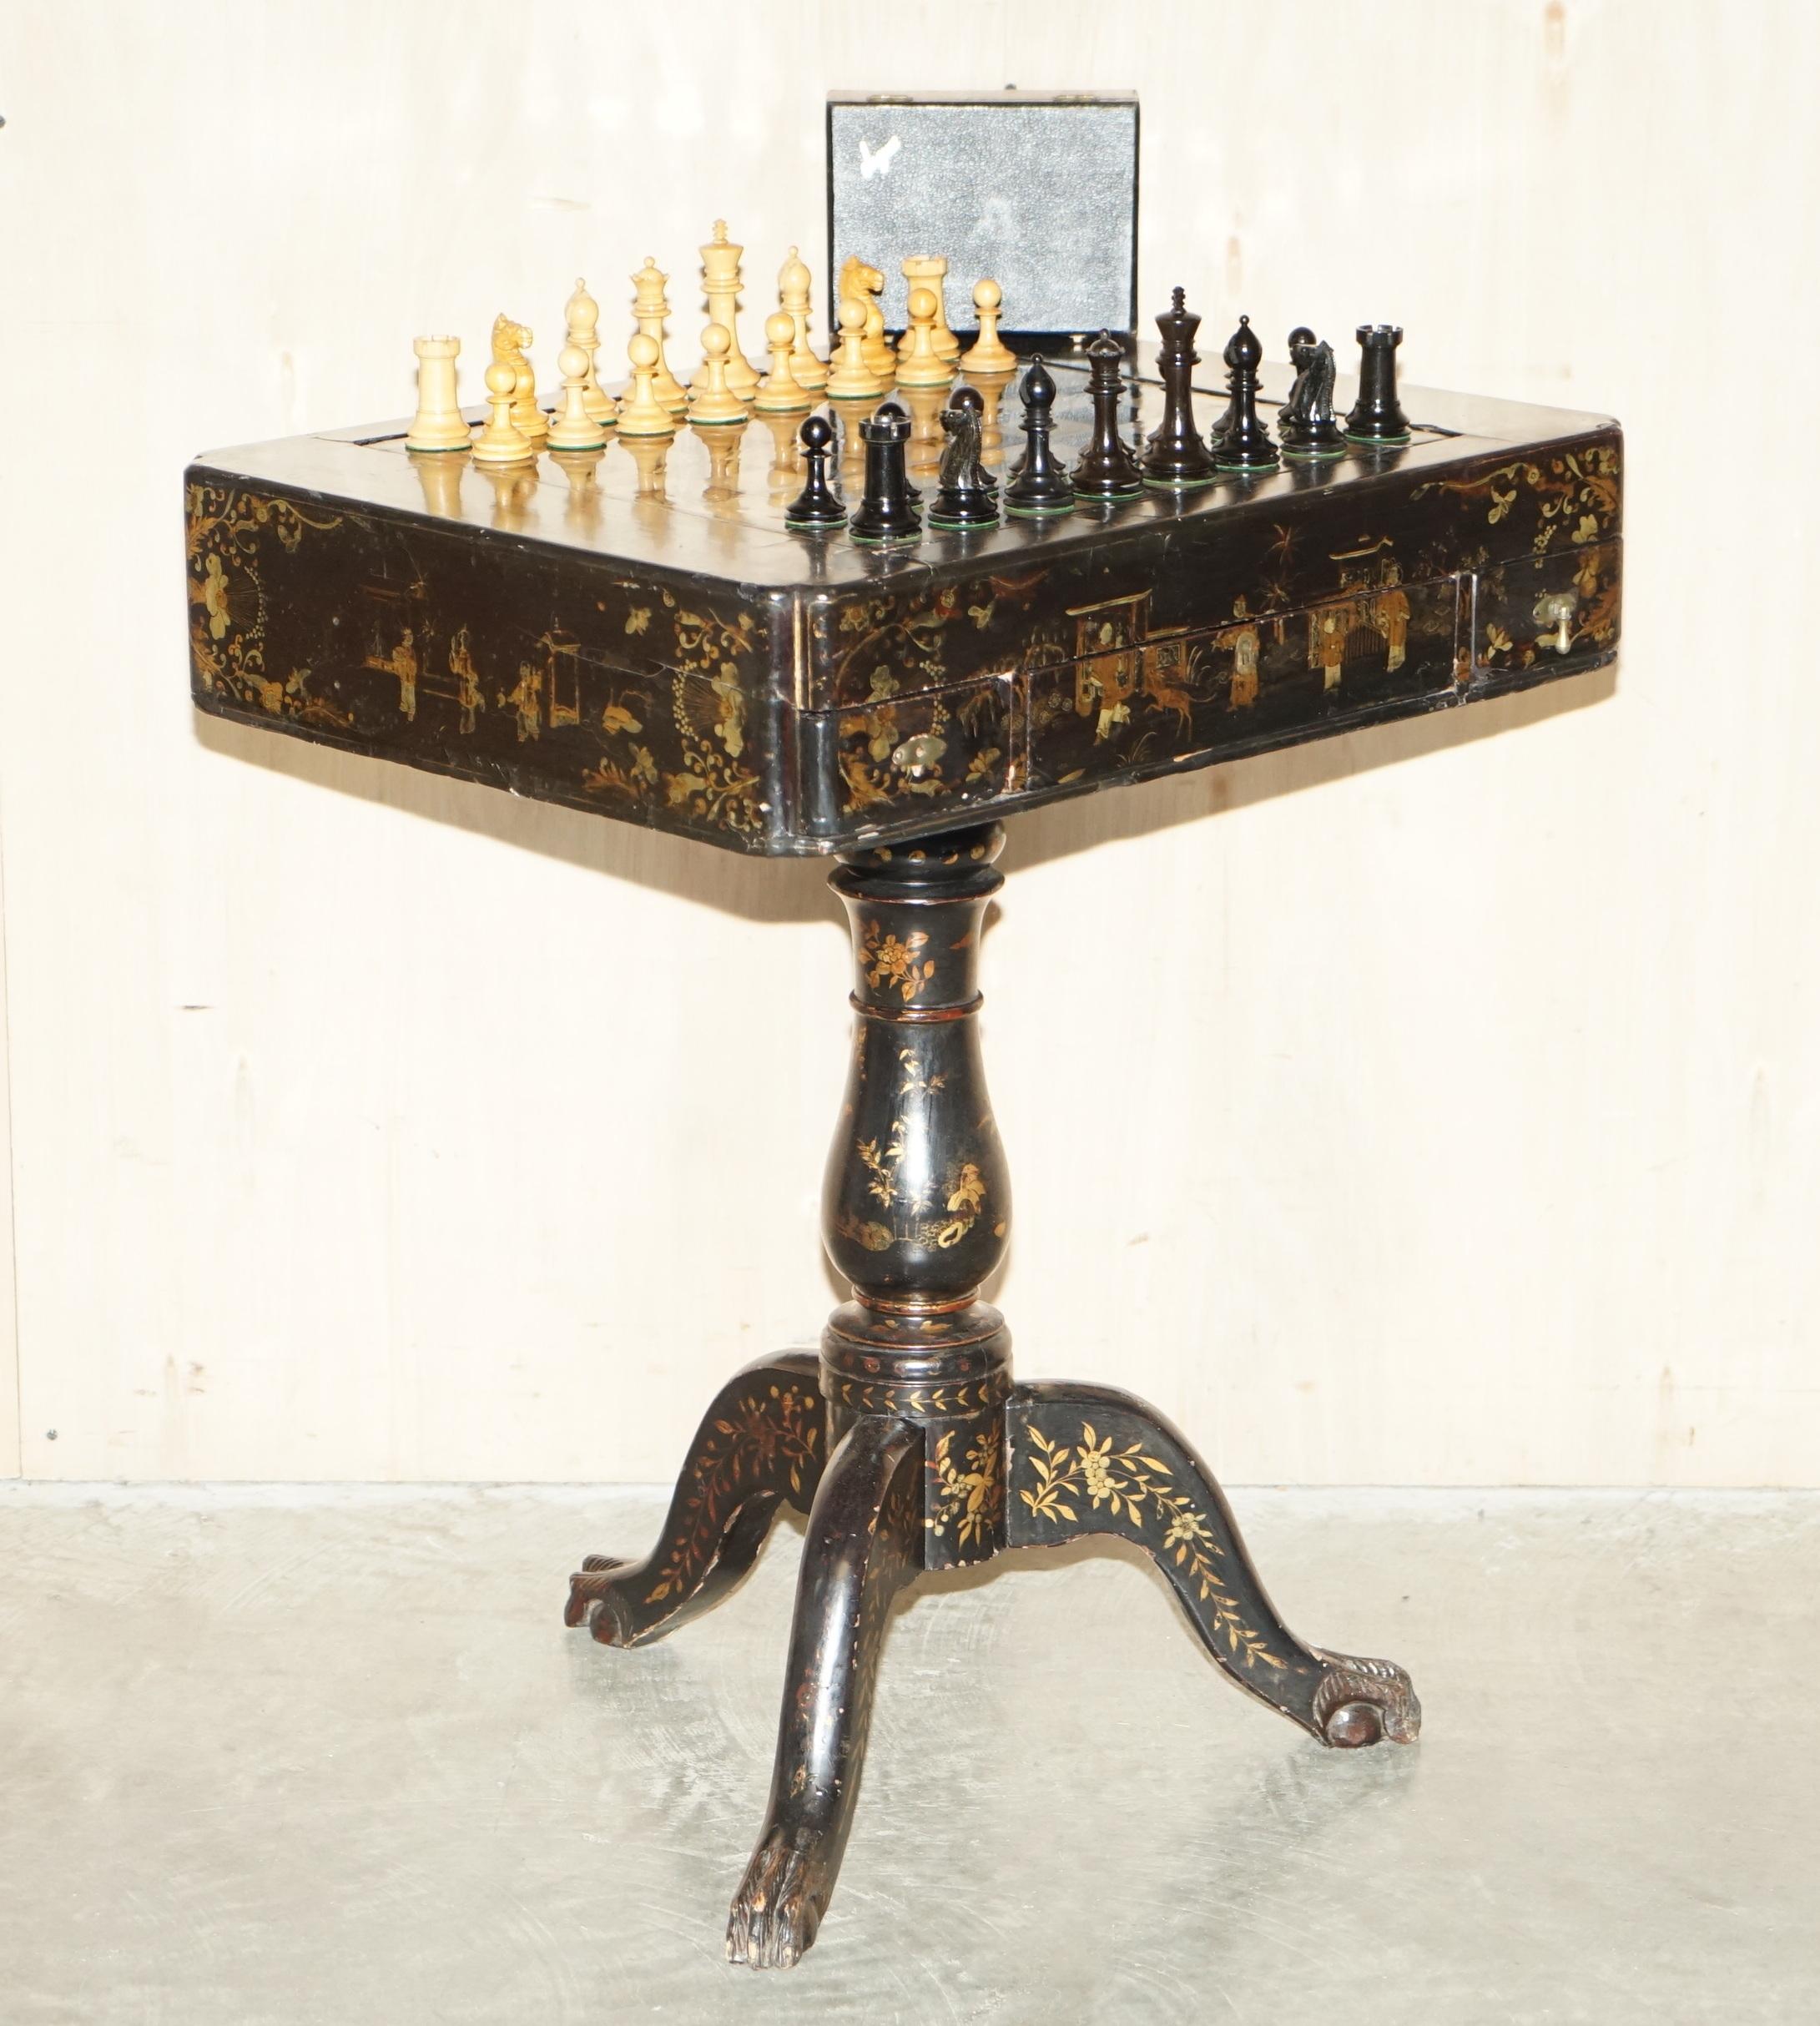 Royal House Antiques

Royal House Antiques is delighted to offer for sale this exquisite Antique Georgian circa 1820 gold gilt and lacquered Chinese Chinoiserie Chessboard and backgammon games table 

Please note the delivery fee listed is just a